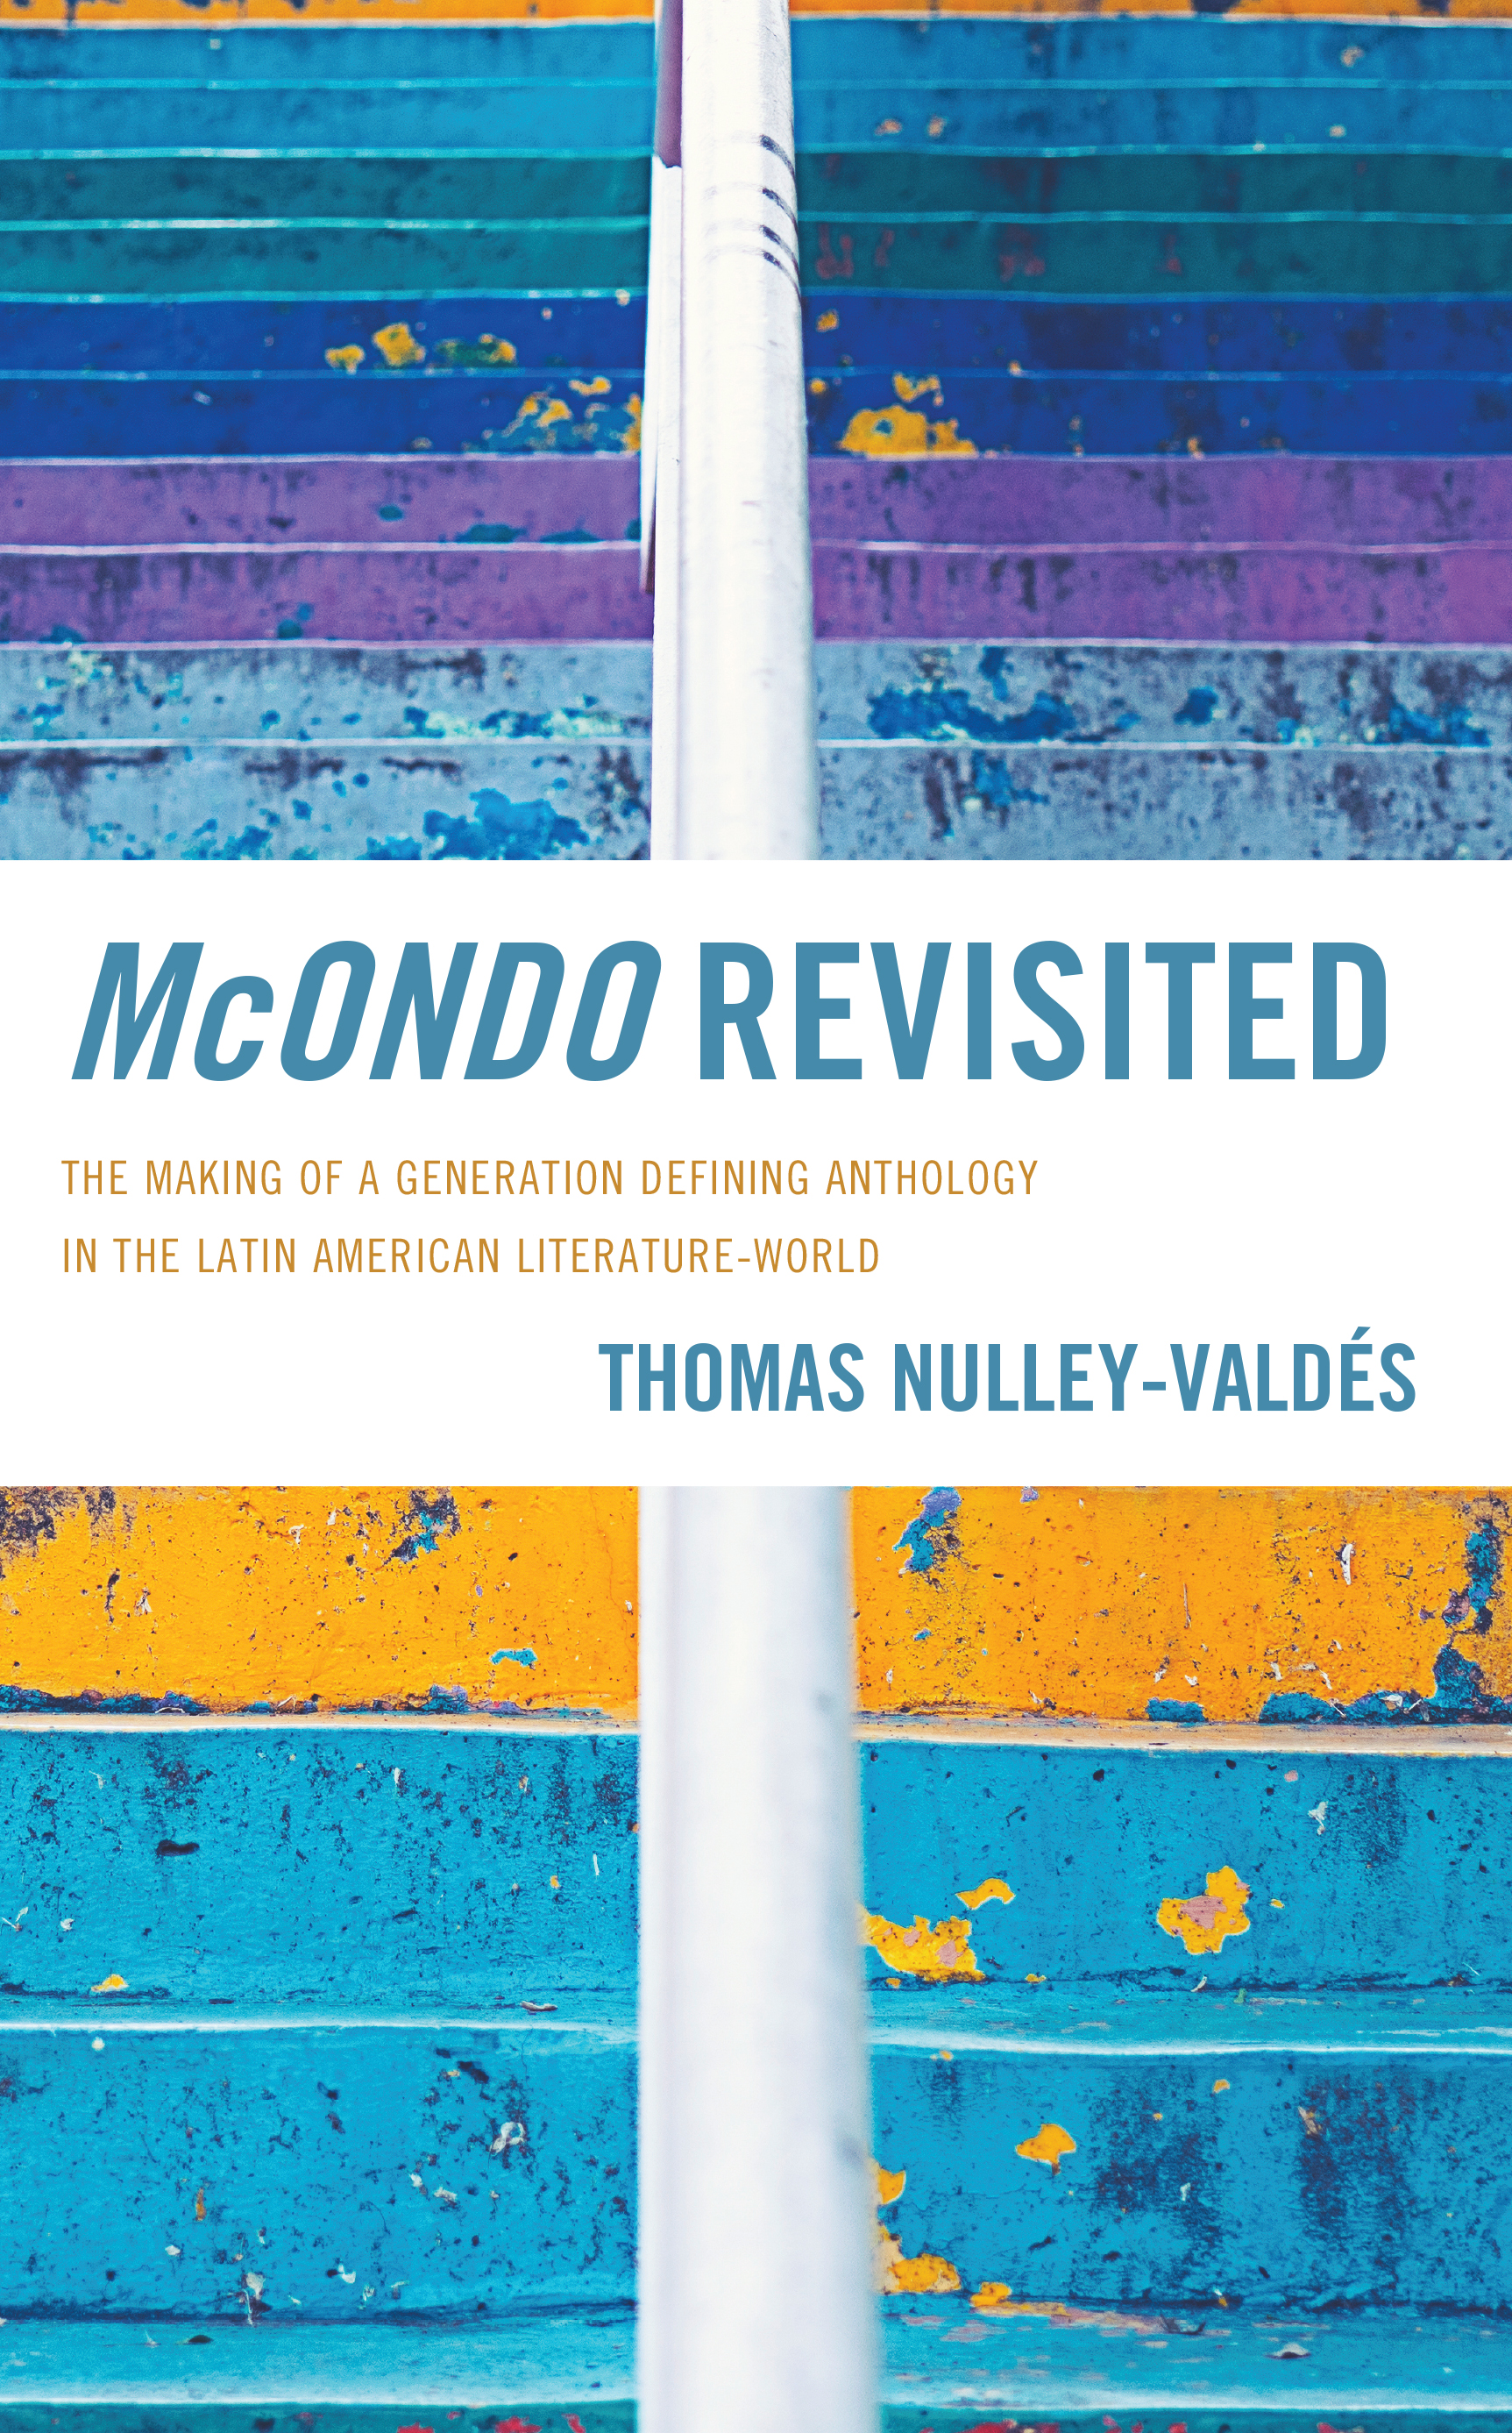 McOndo Revisited: The Making of a Generation Defining Anthology in the Latin American Literature-World